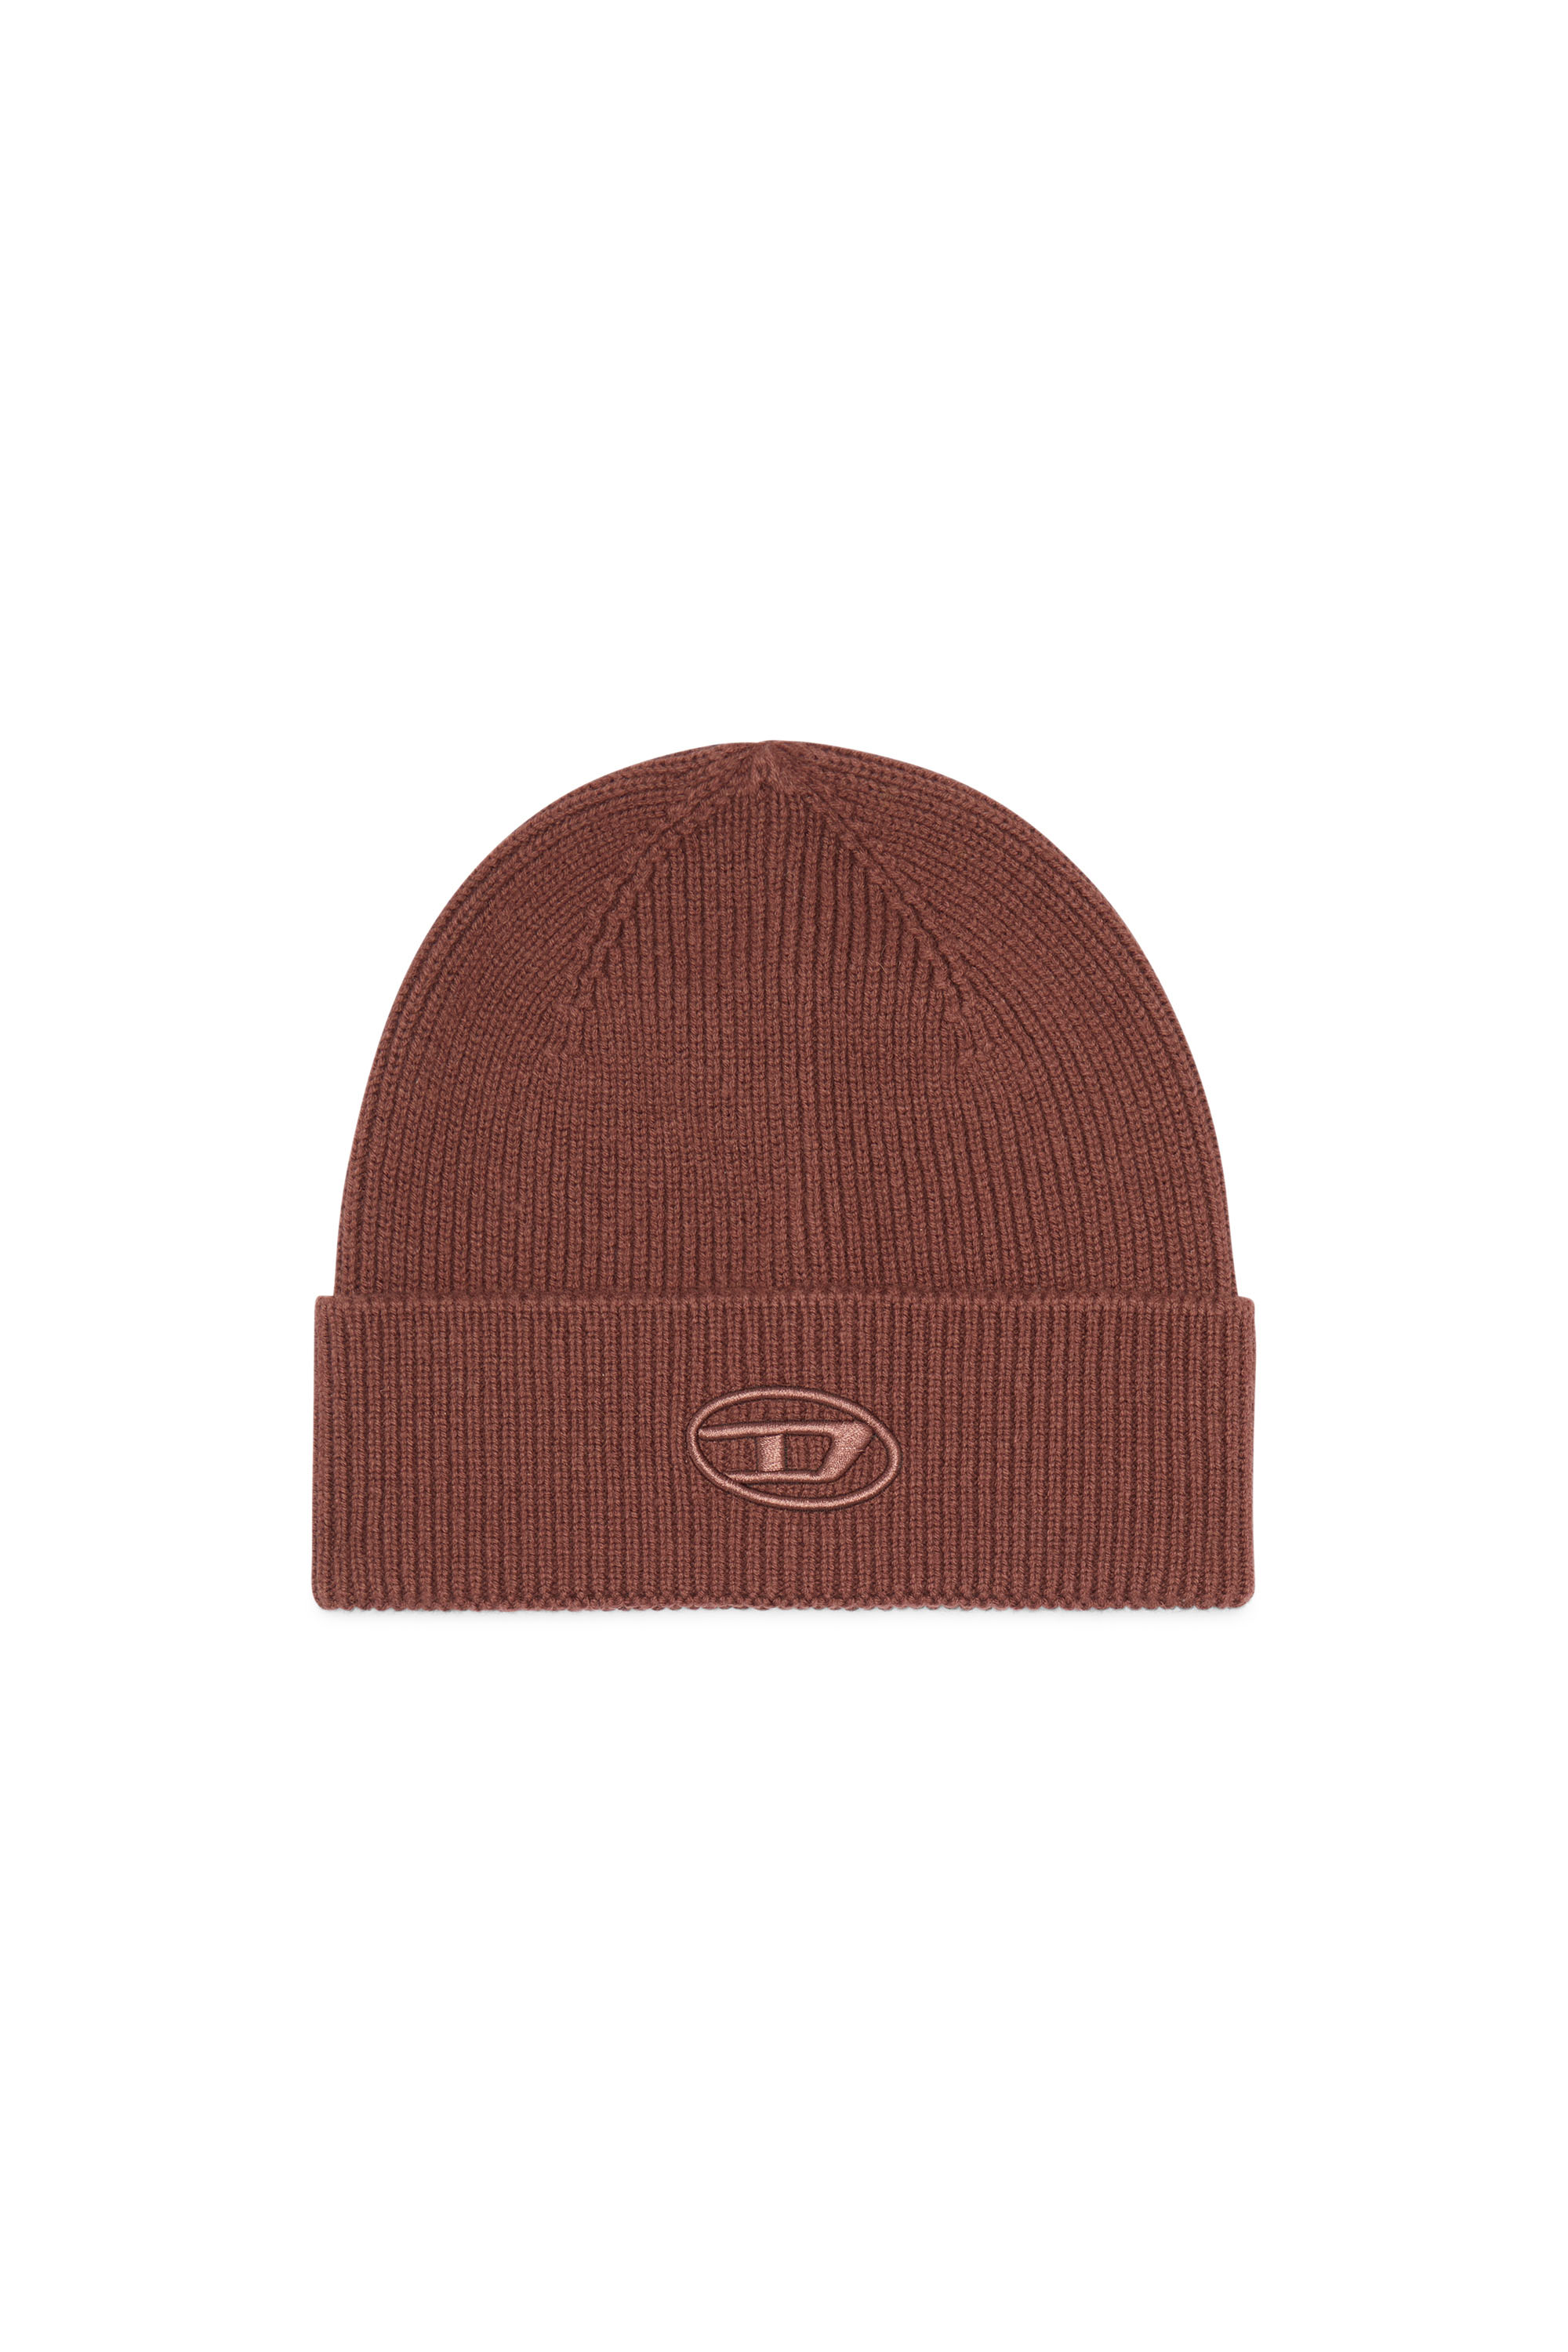 DIESEL RIBBED BEANIE WITH D EMBROIDERY